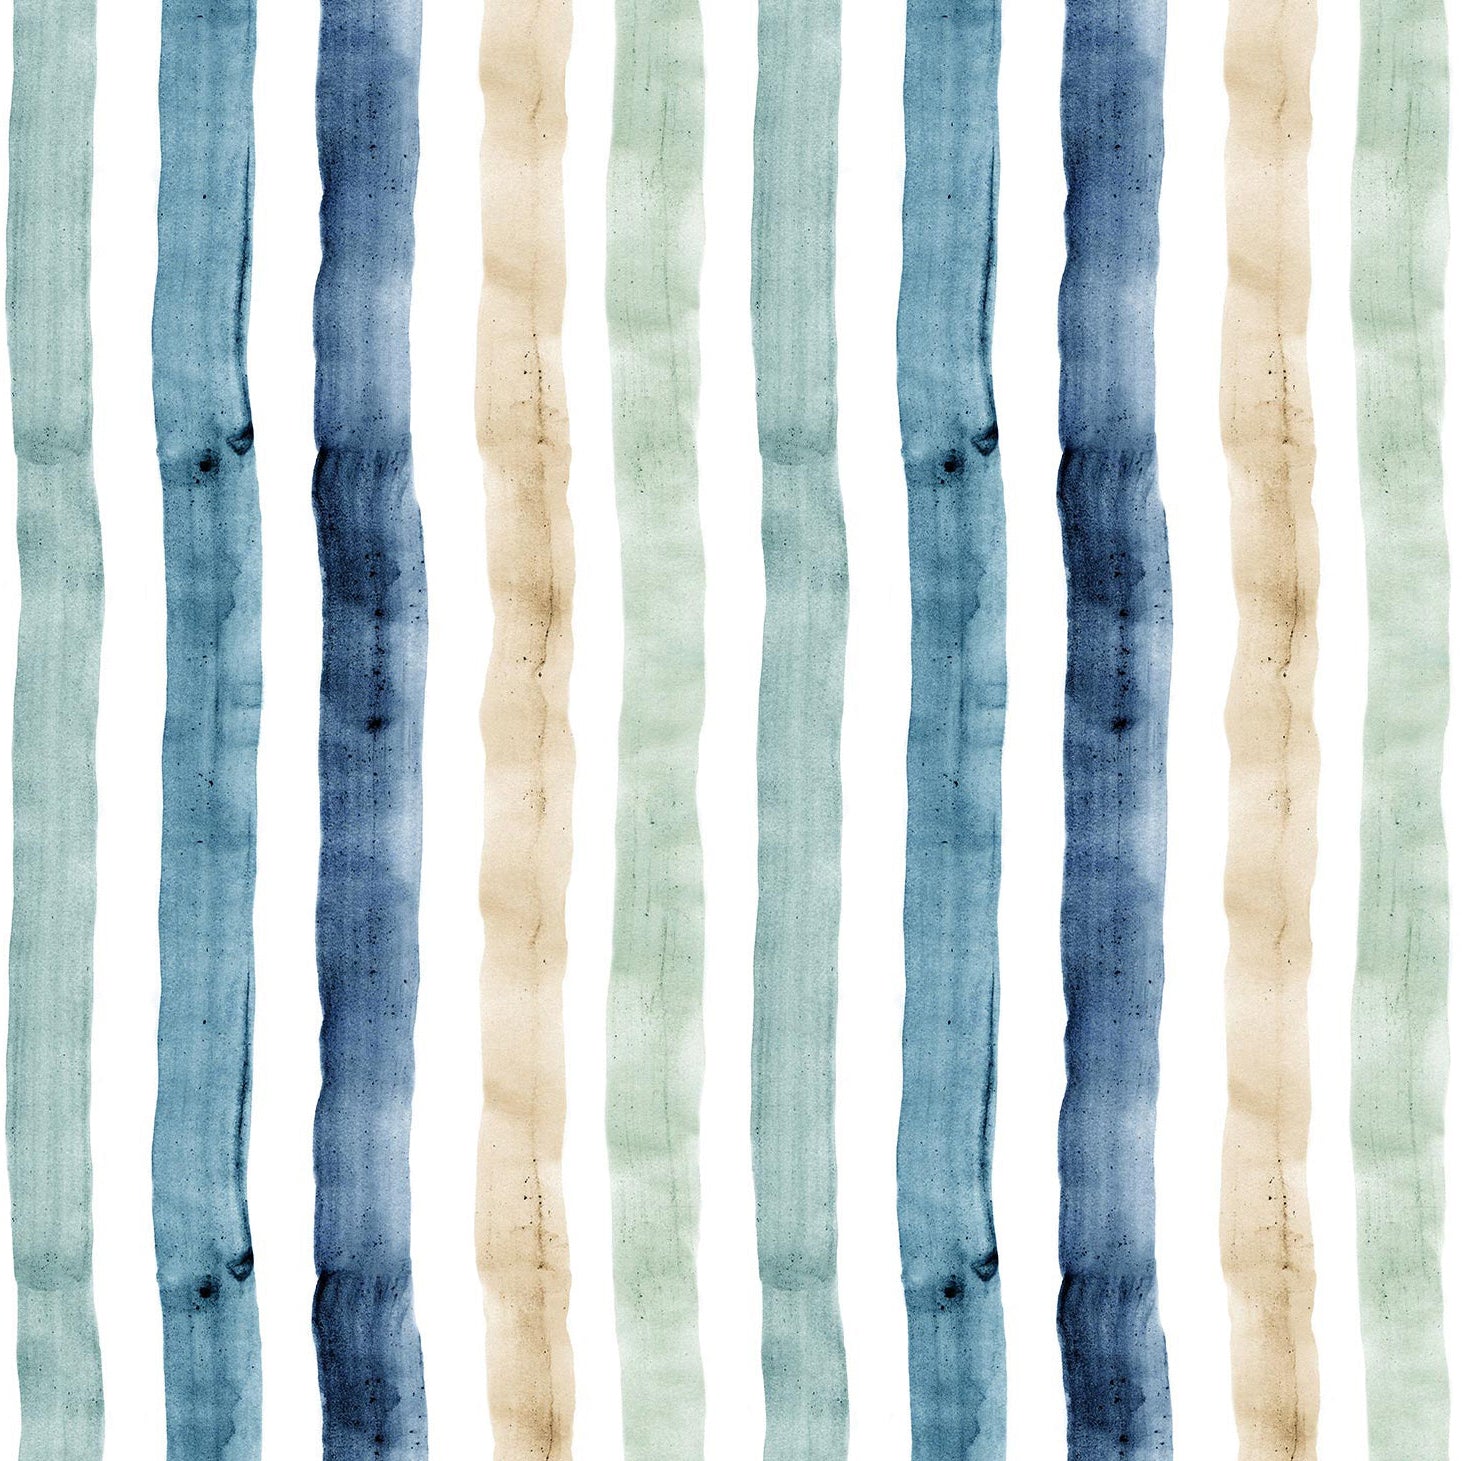 Detail of wallpaper in a painterly stripe print in shades of blue, green and tan on a white field.